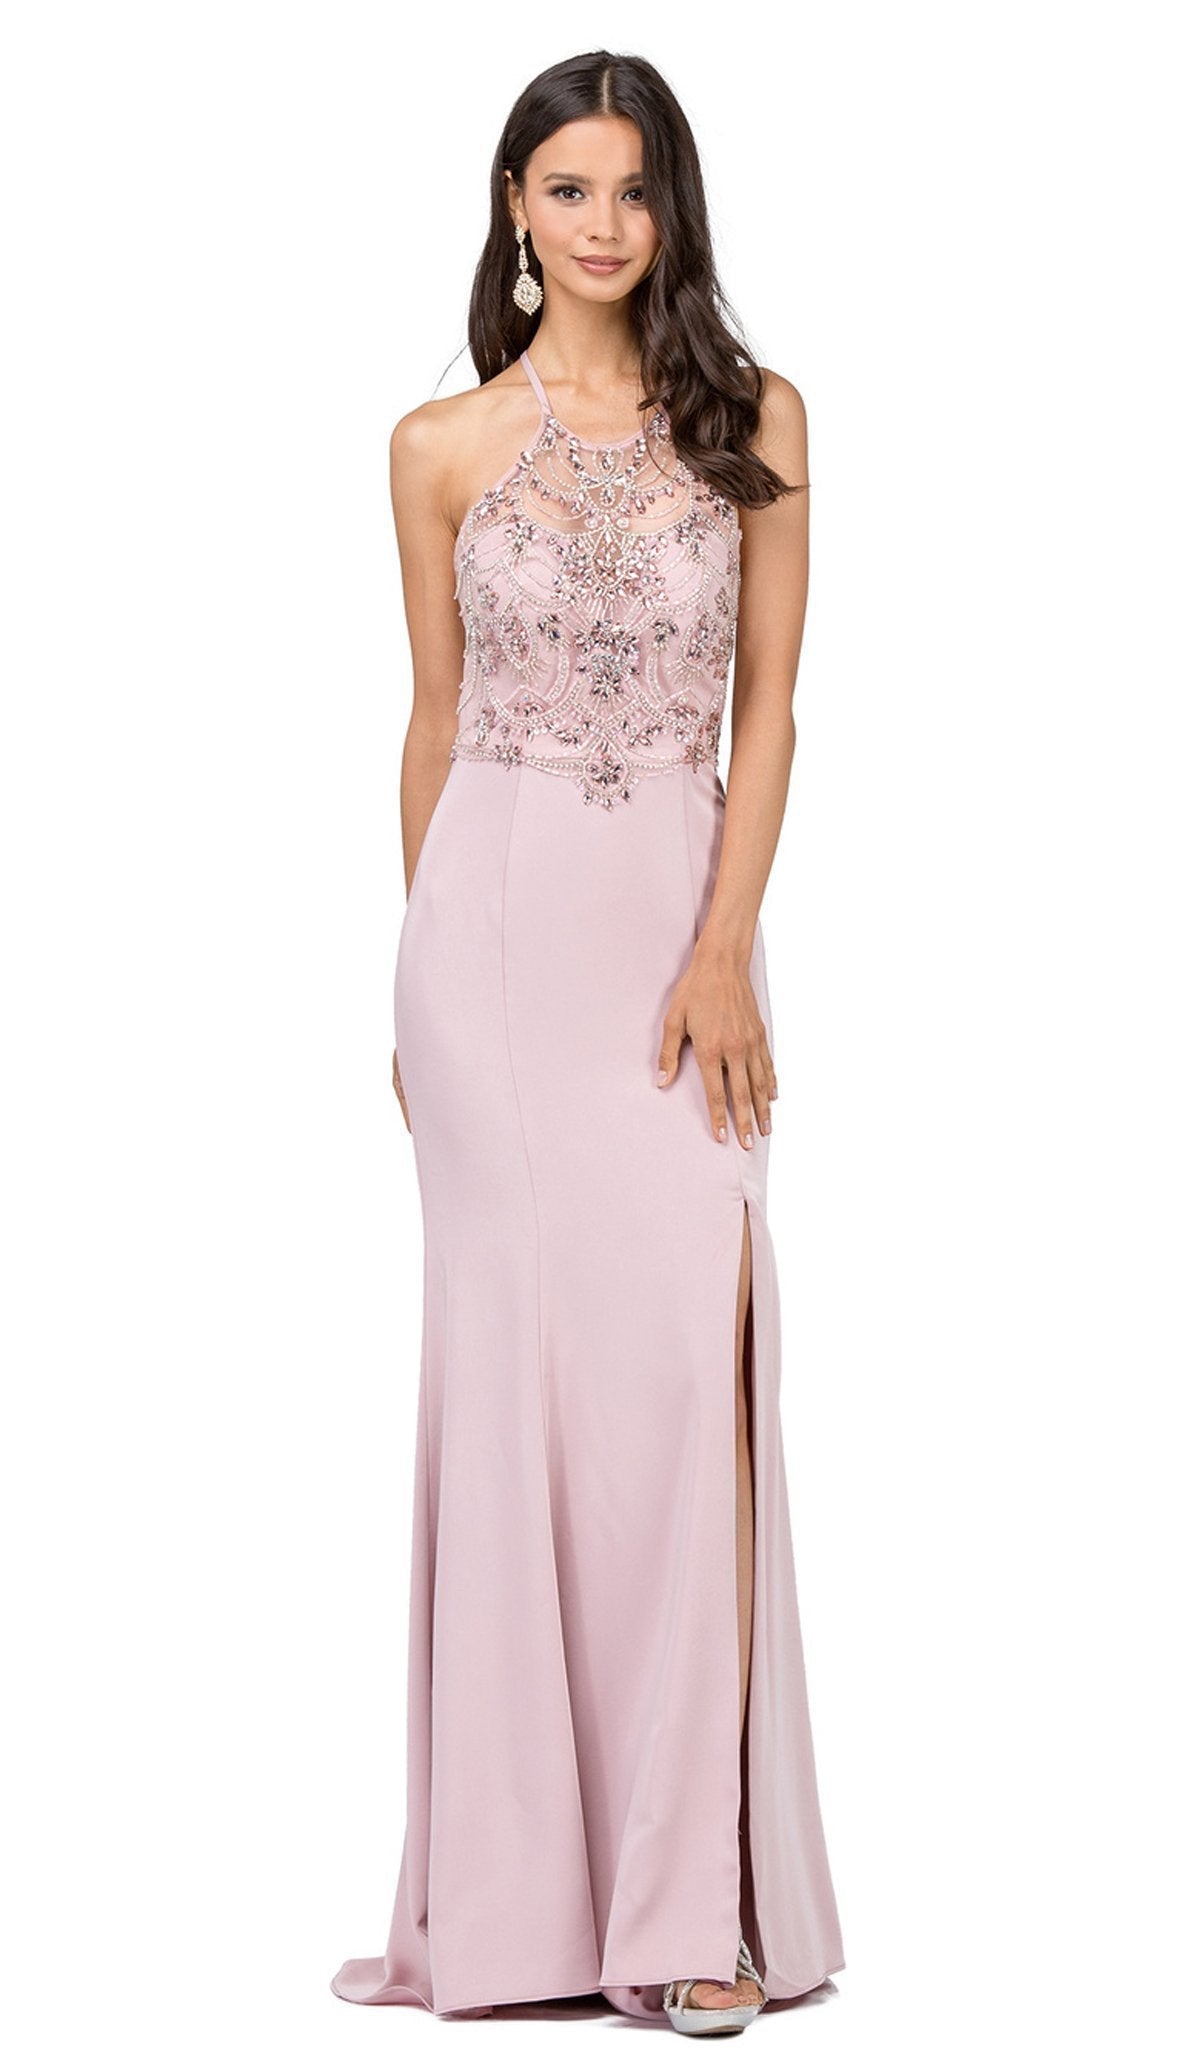 Dancing Queen - 2200 Jeweled Garland Motif Illusion Sheath Prom Gown Special Occasion Dress XS / Dusty Pink